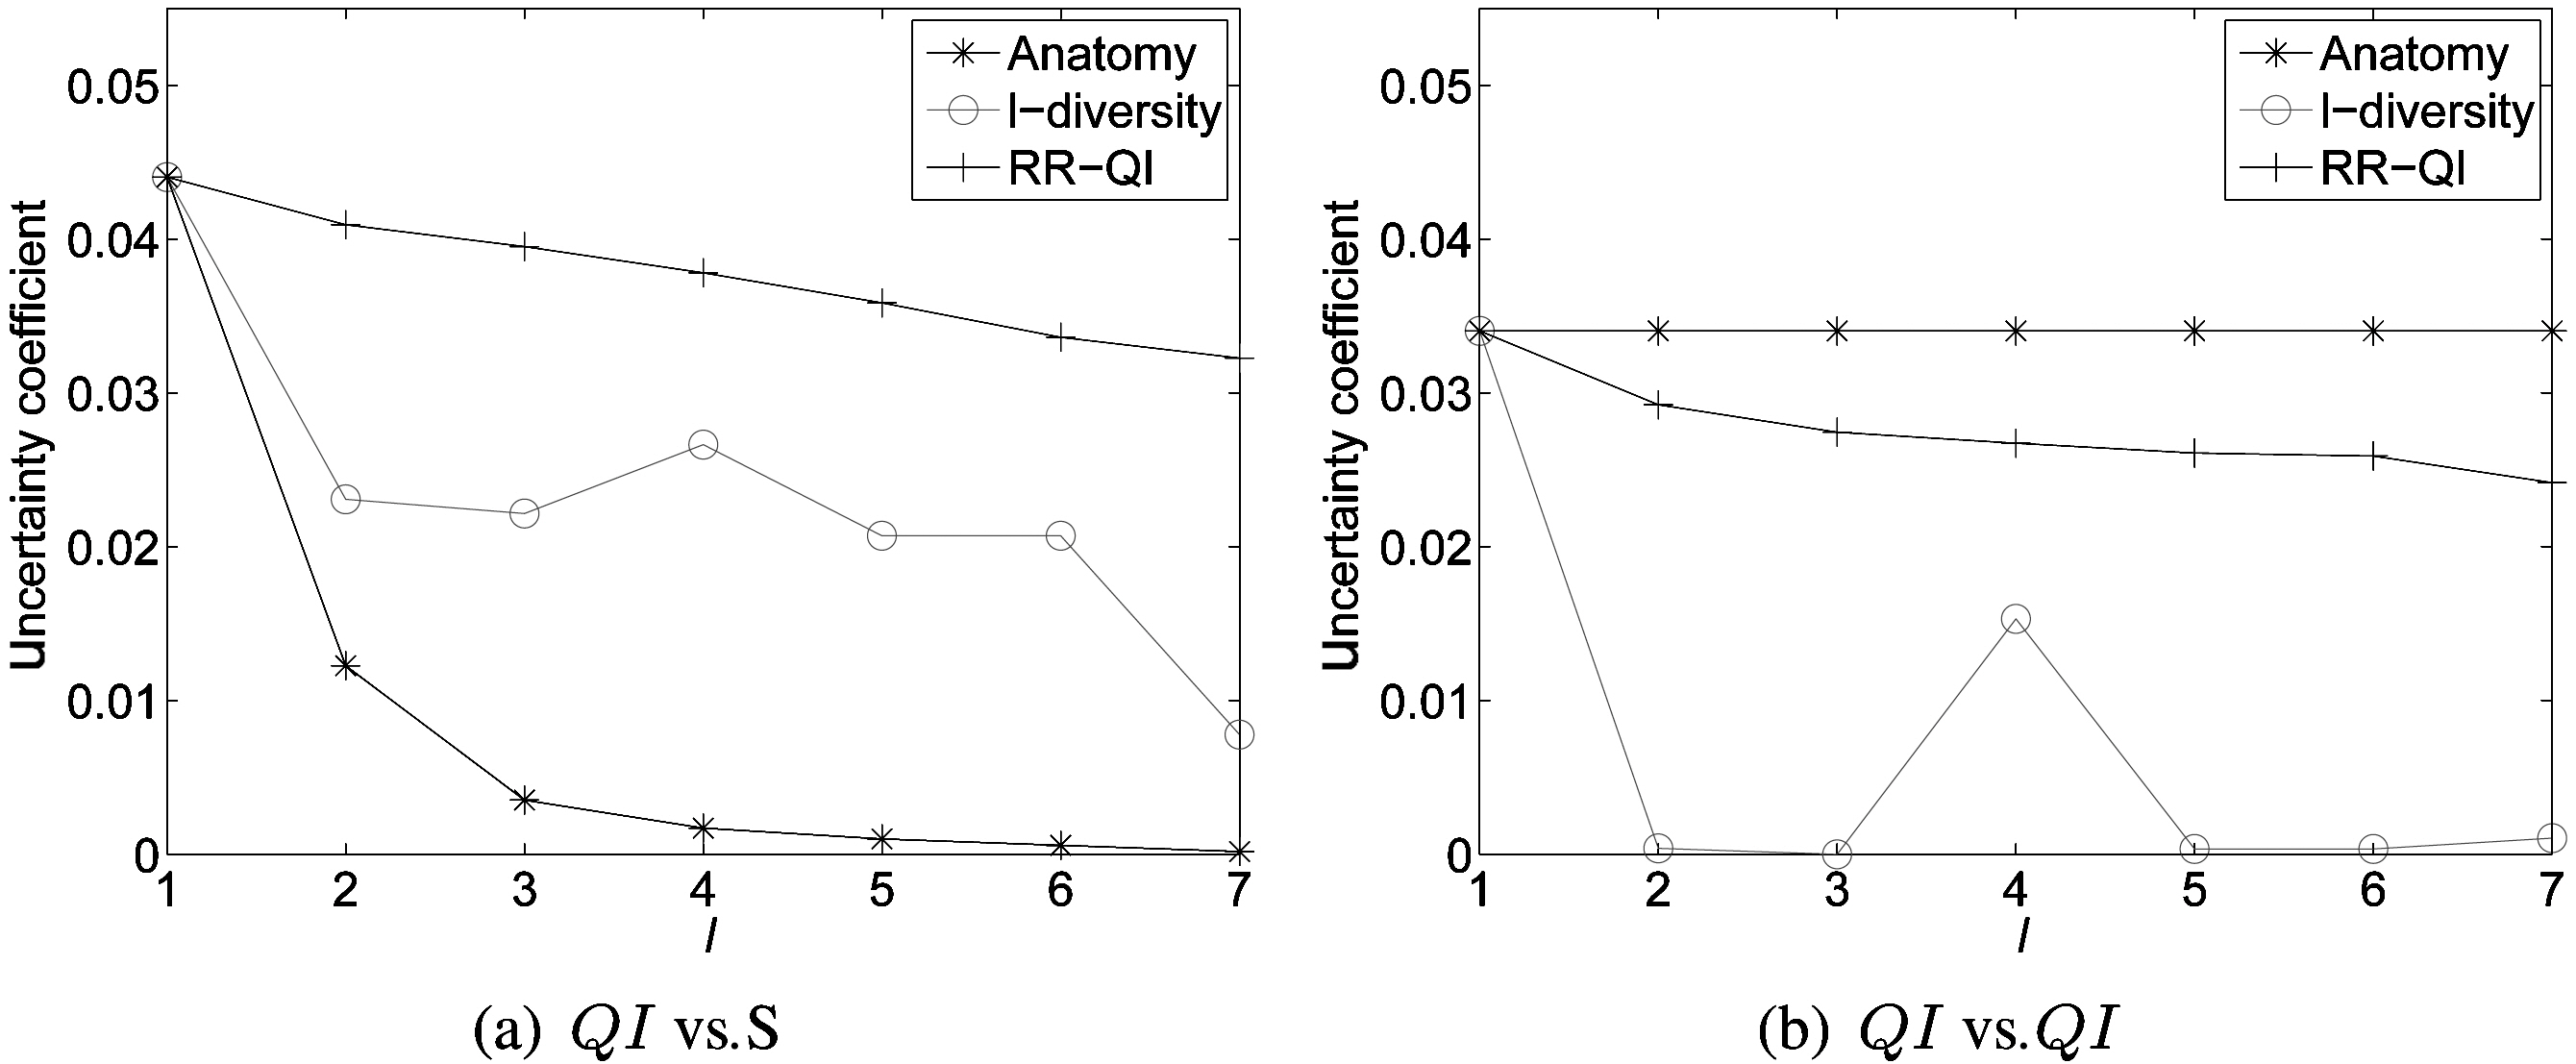 Average value of uncertainty coefficients among attributes for anatomy l-diversity and RR-QI (randomized response-quasiidentifier; data setESGRO).